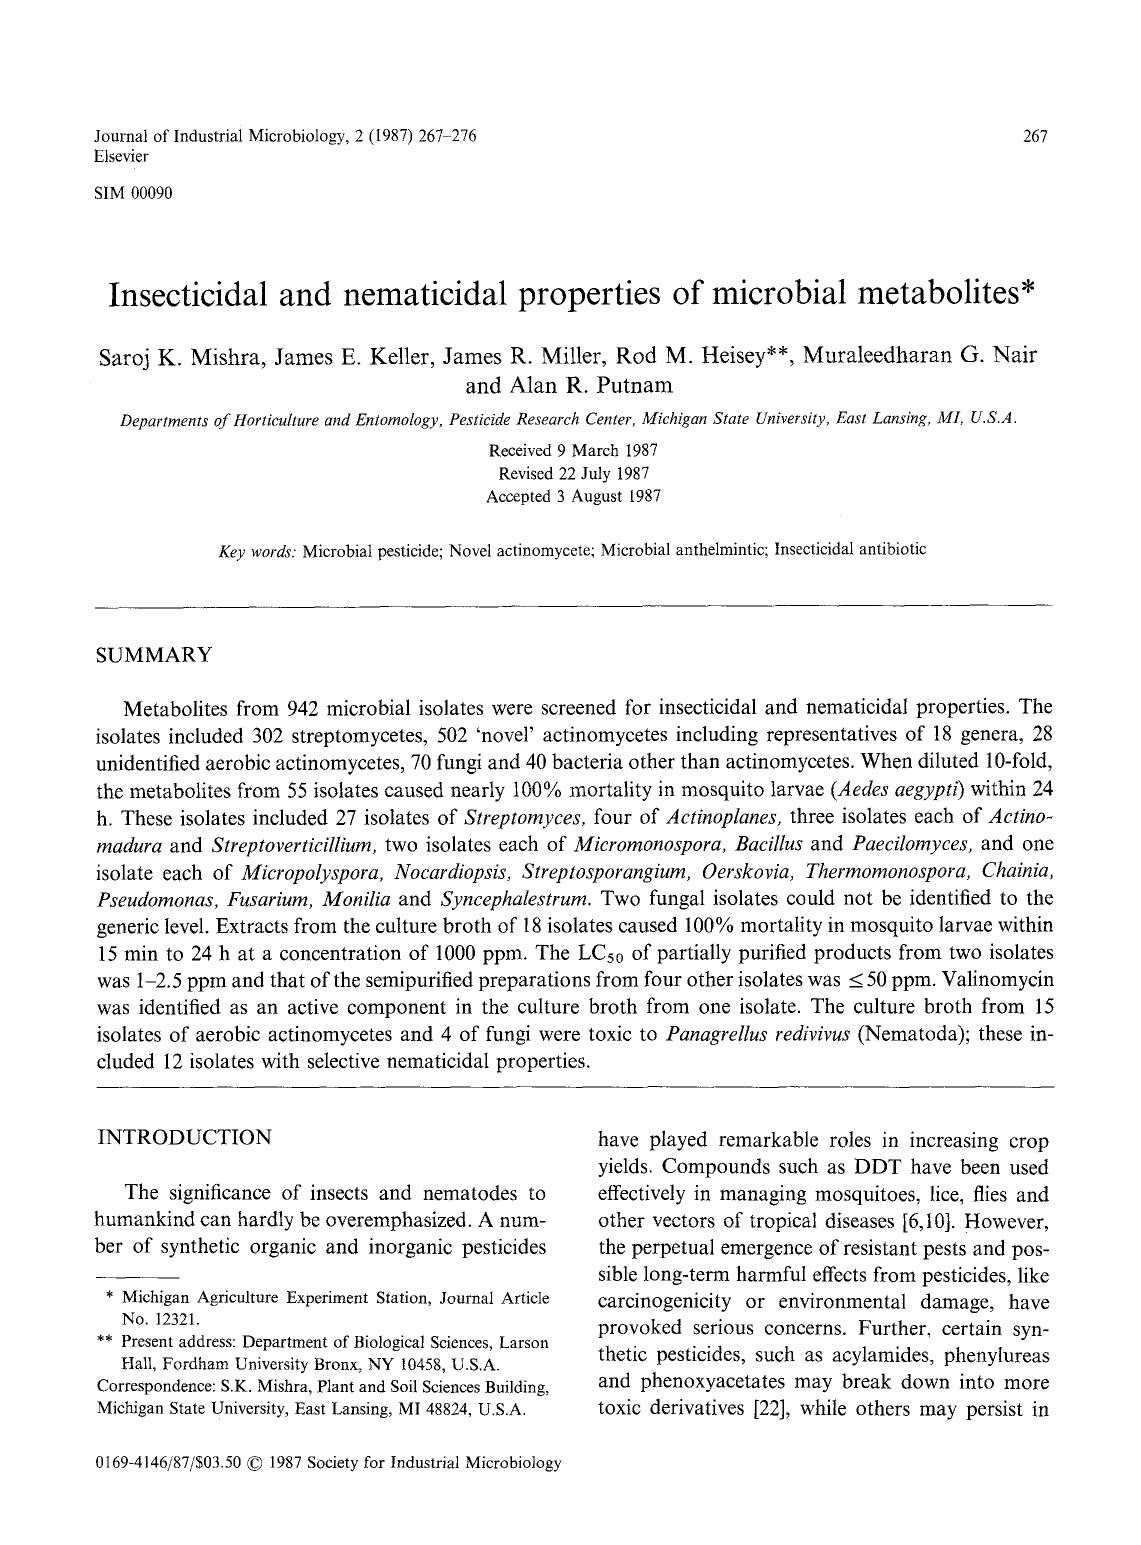 Insecticidal and nematicidal properties of microbial metabolites by Unknown